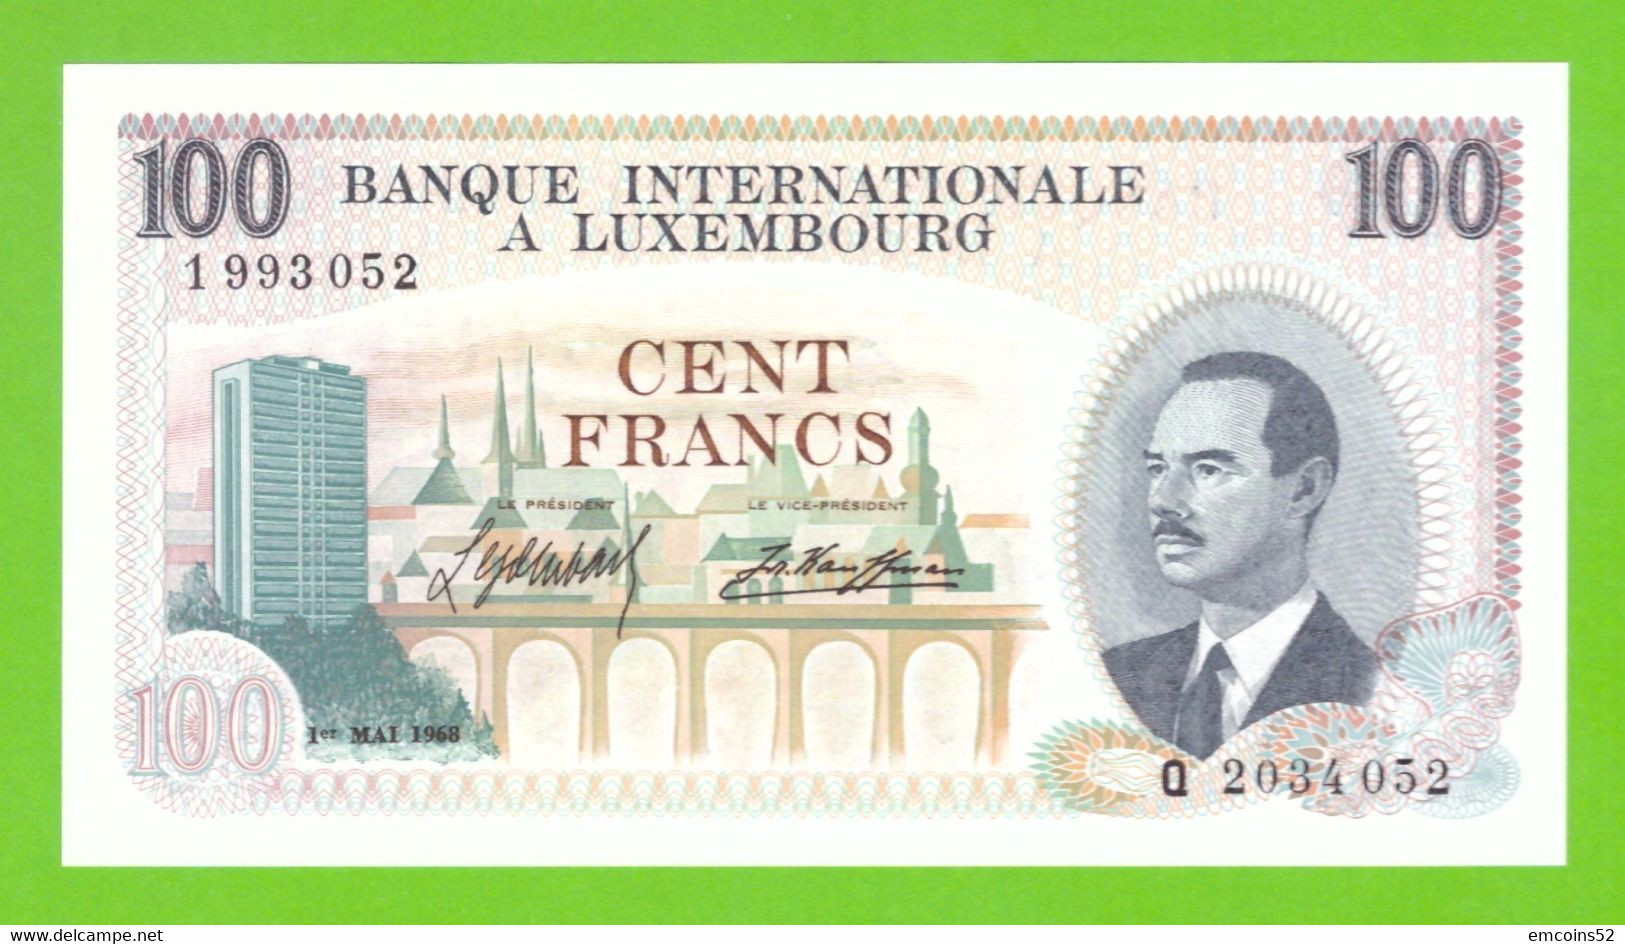 LUXEMBOURG 100 FRANCS 1968  P-14 UNC - Luxembourg